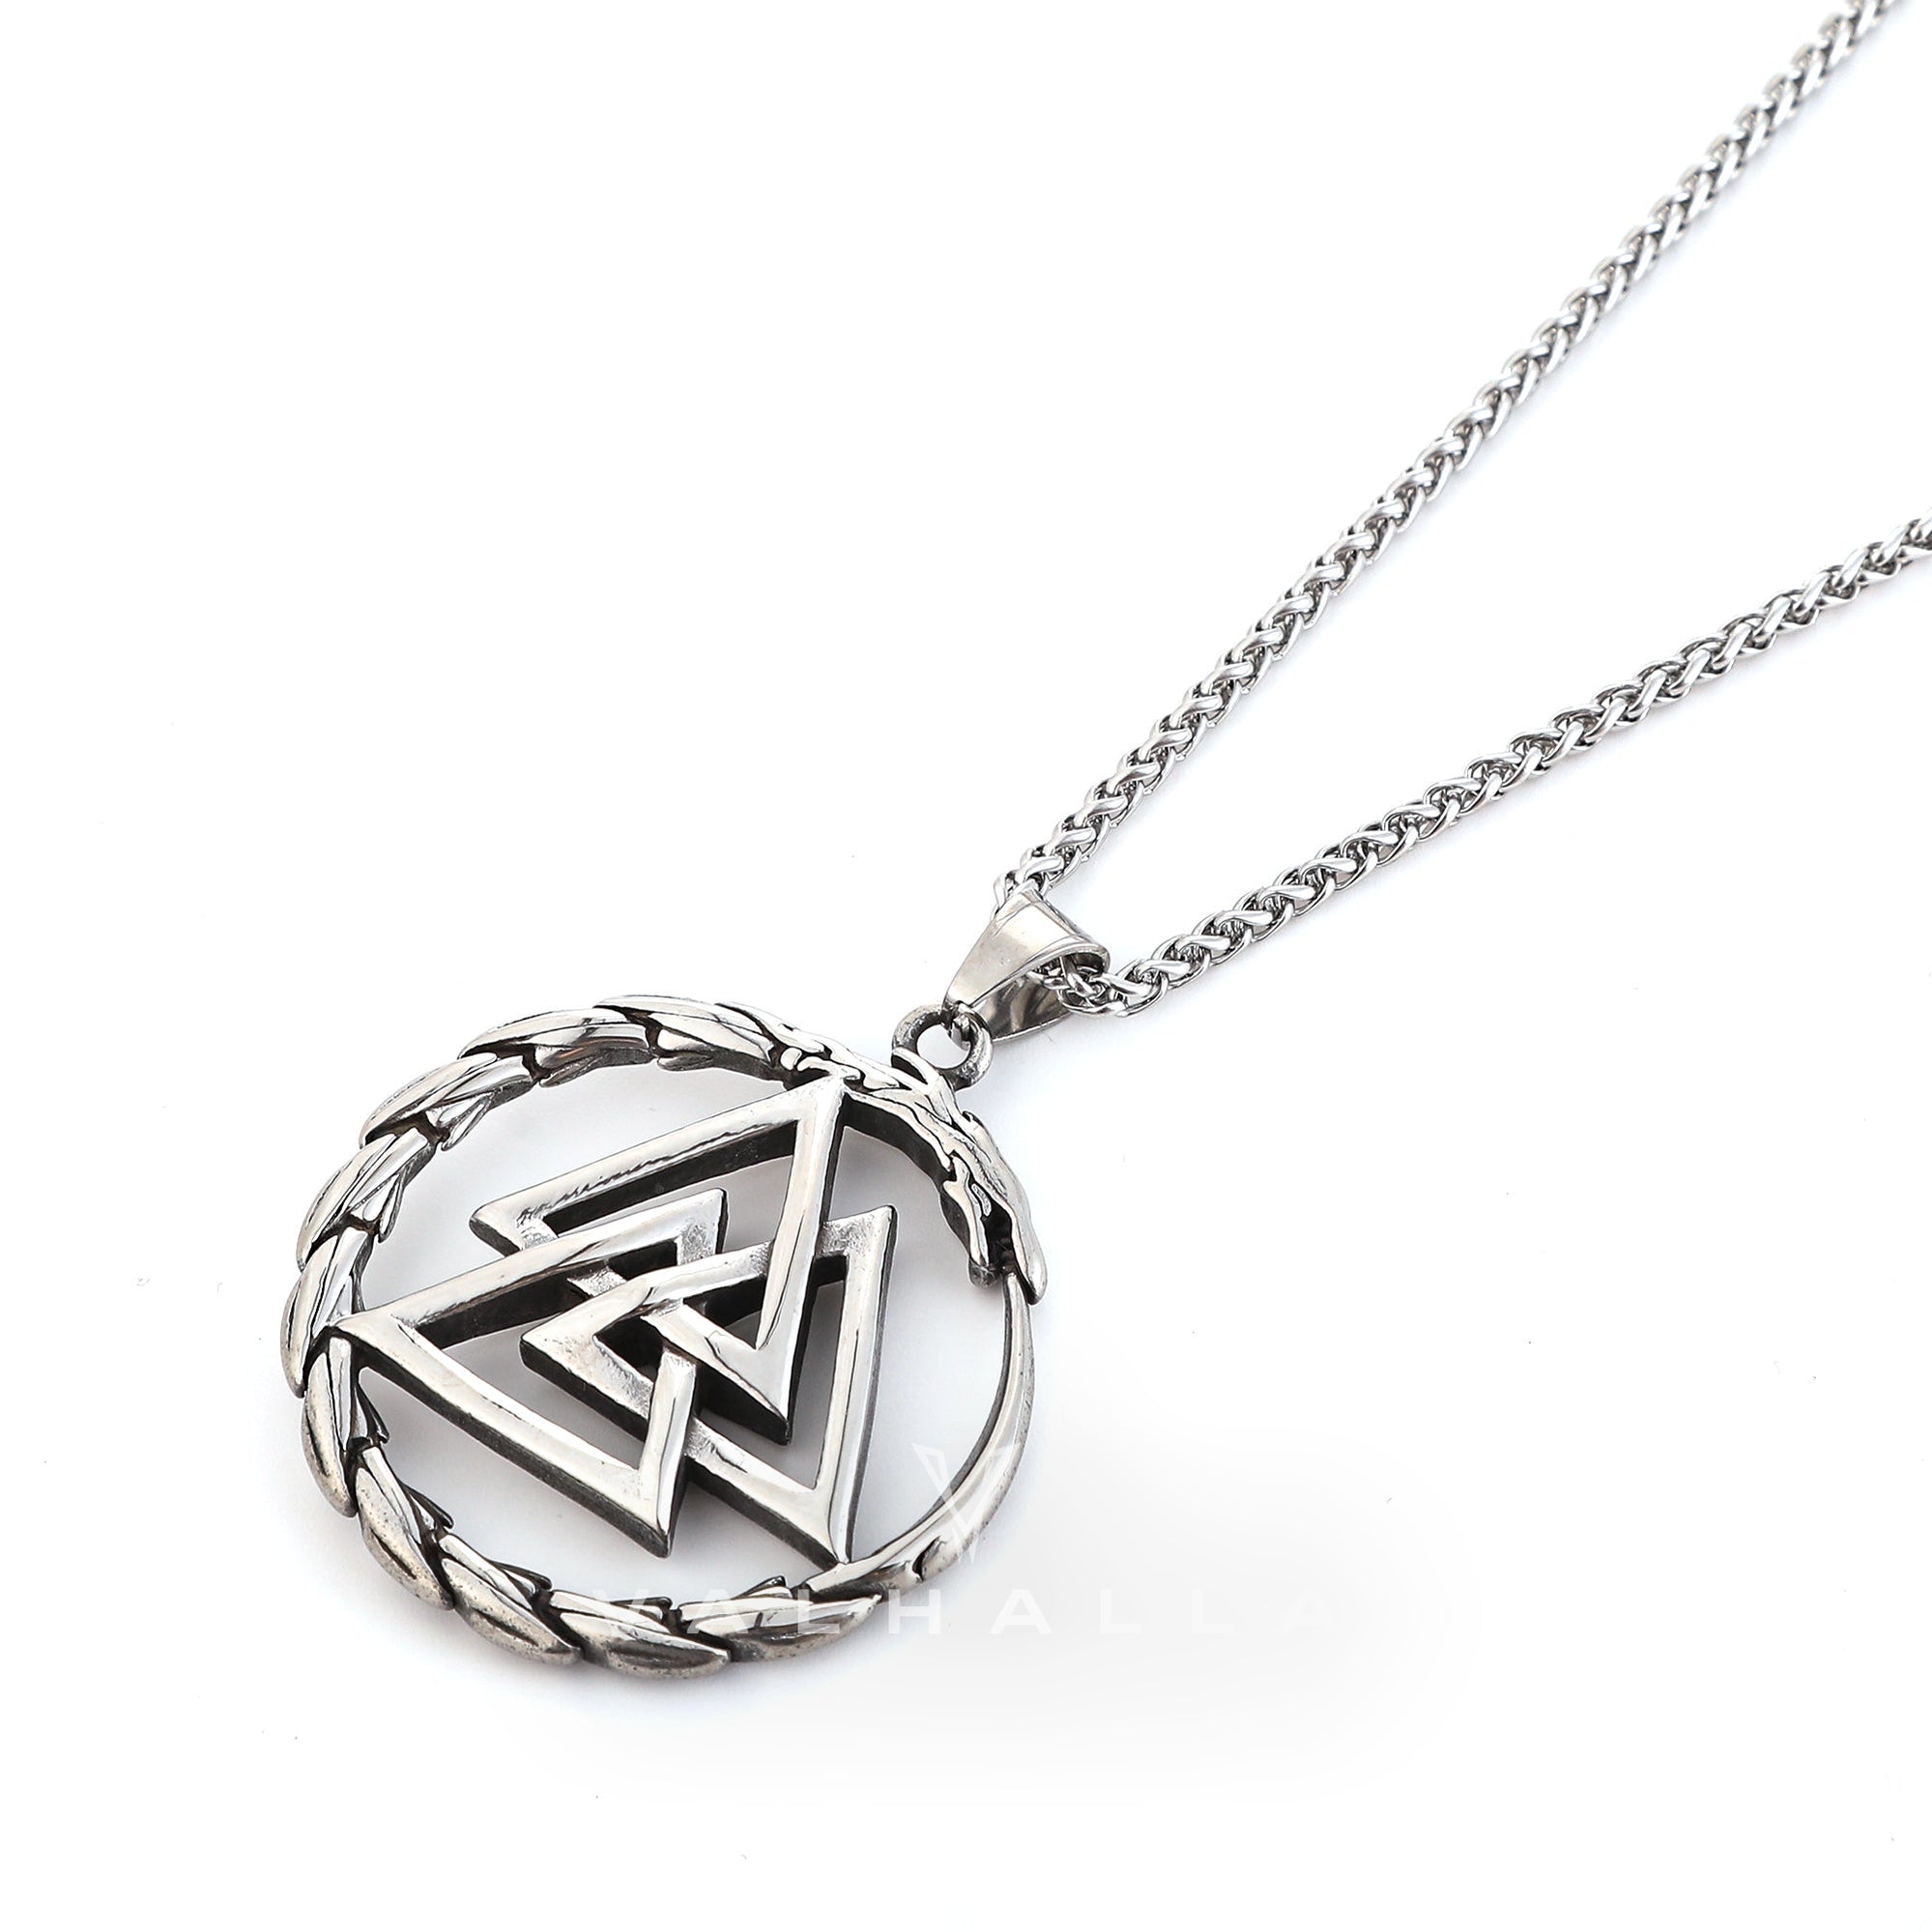 Handcrafted Stainless Steel Valknut and Jormungand Pendant & Chain